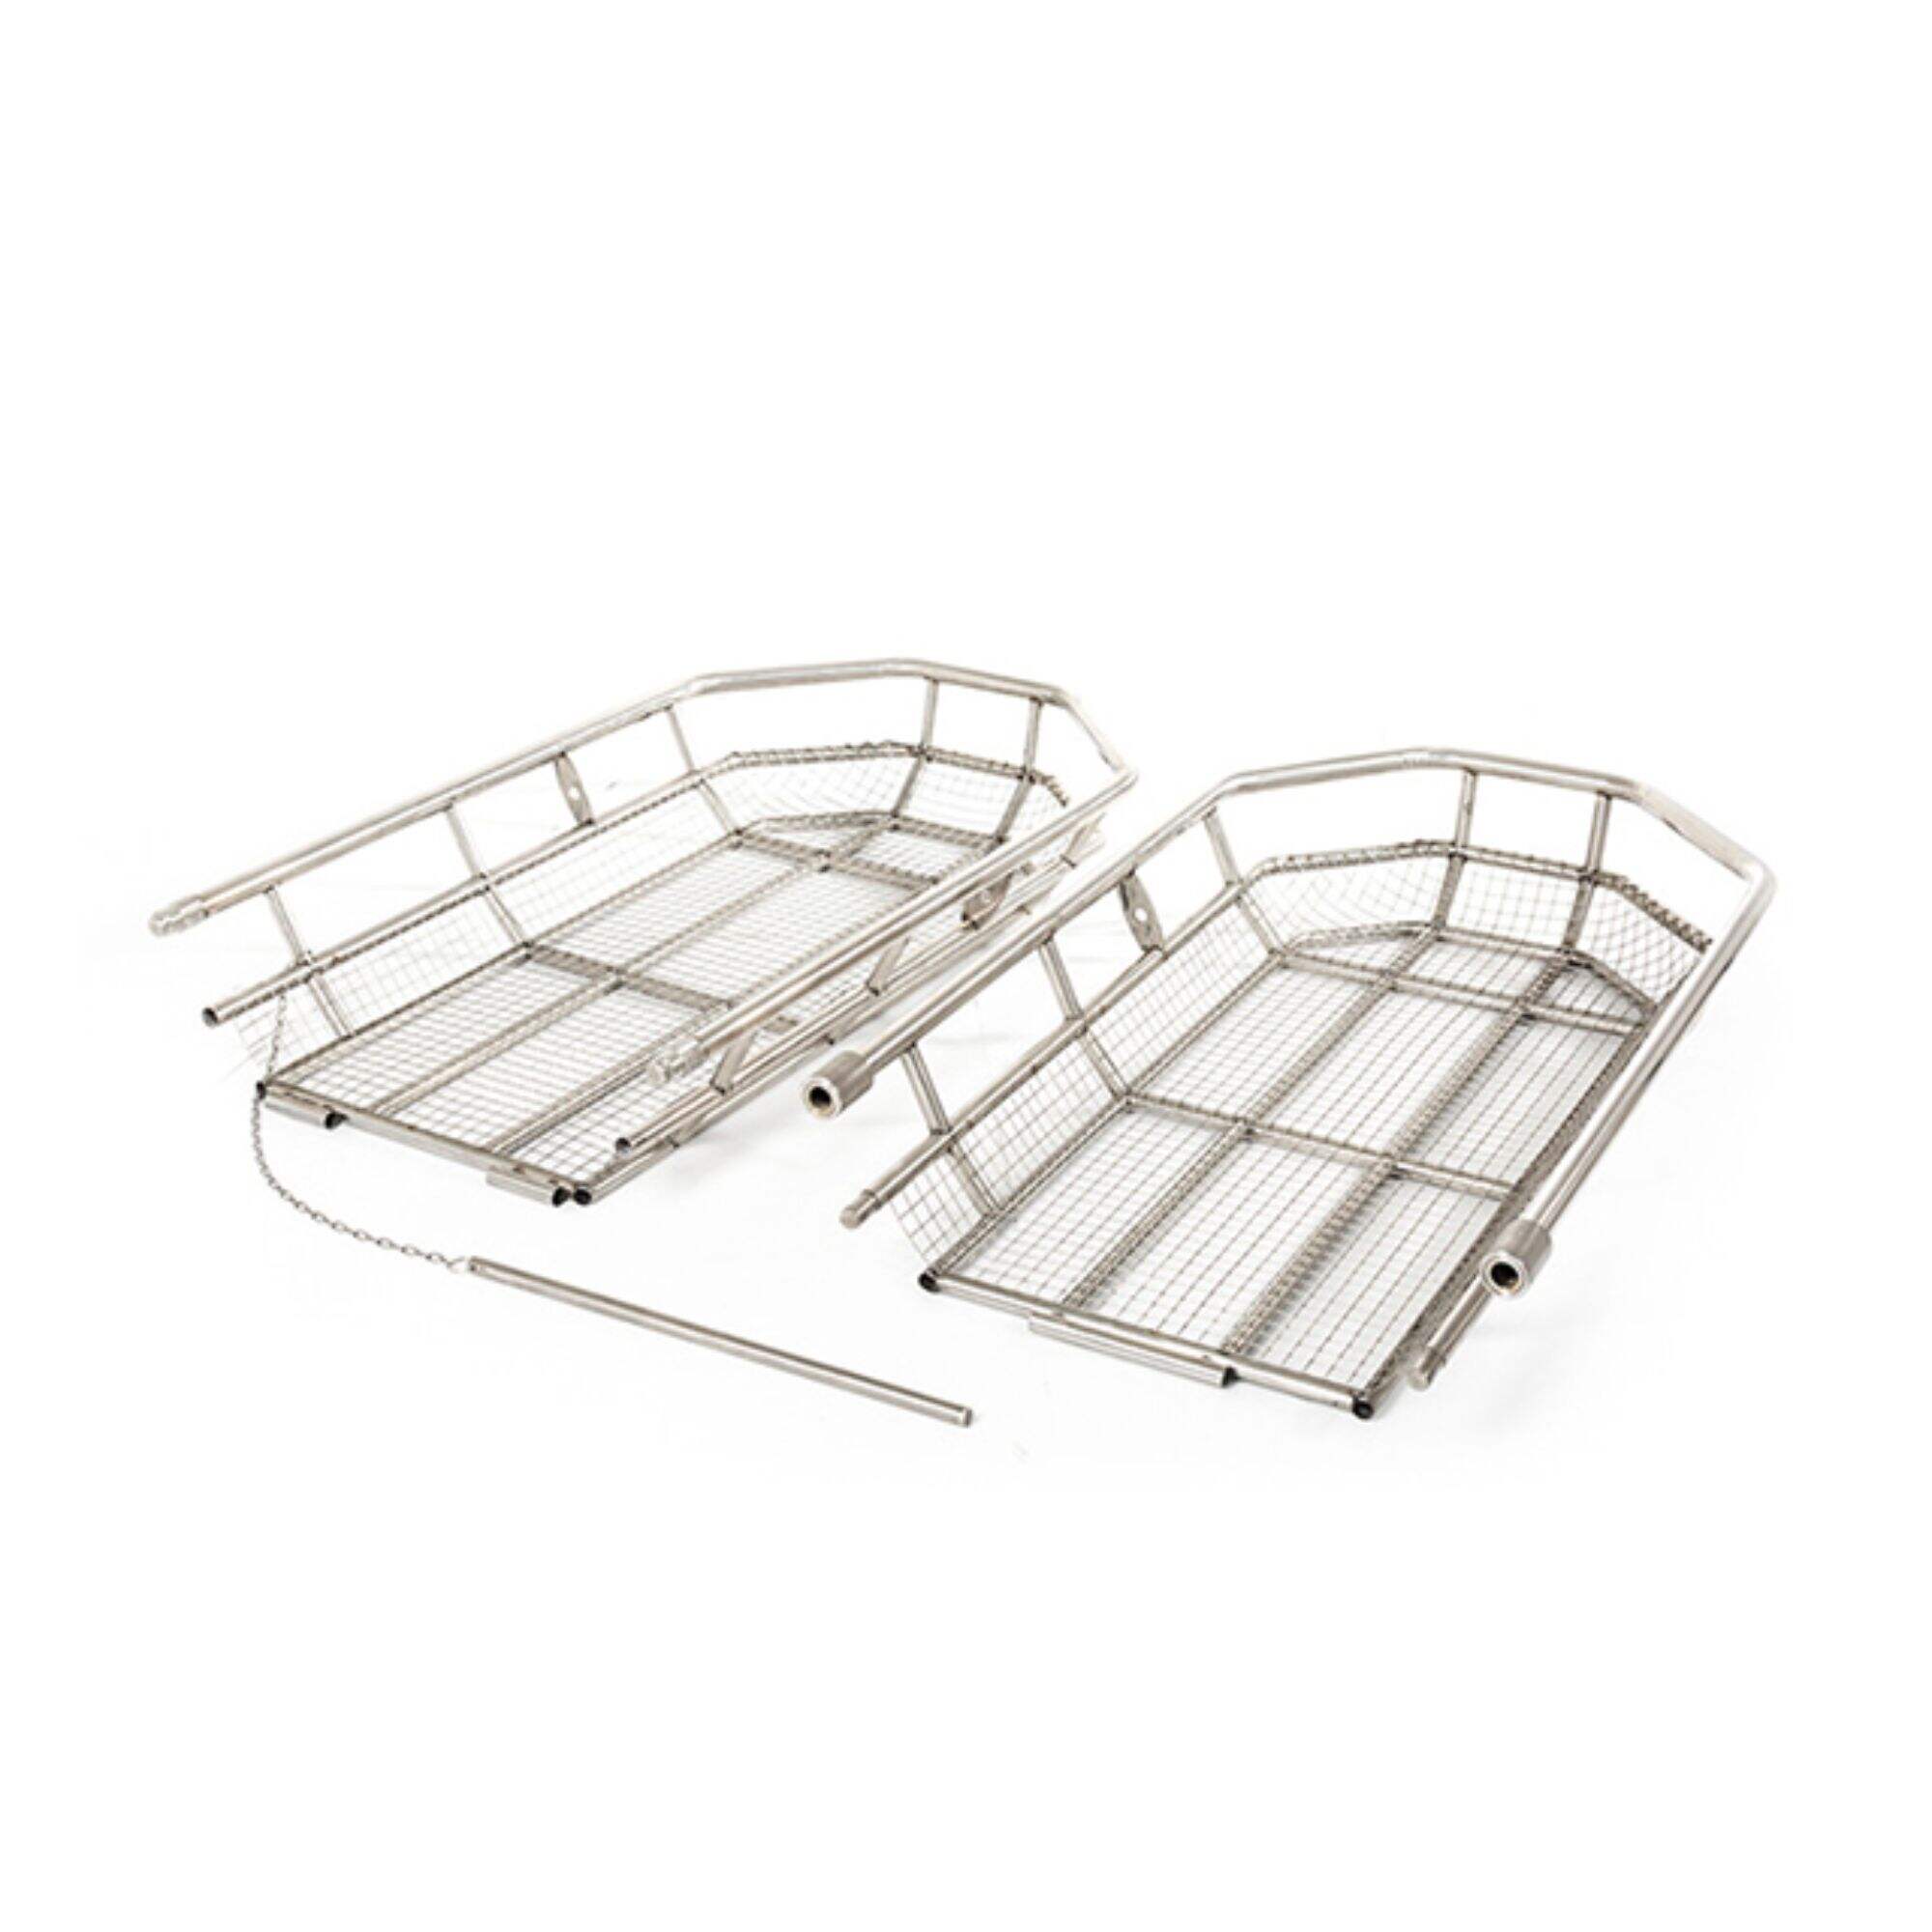 YXH-6D Stainless 2 Piece Basket Stretcher With Lifting Bridle